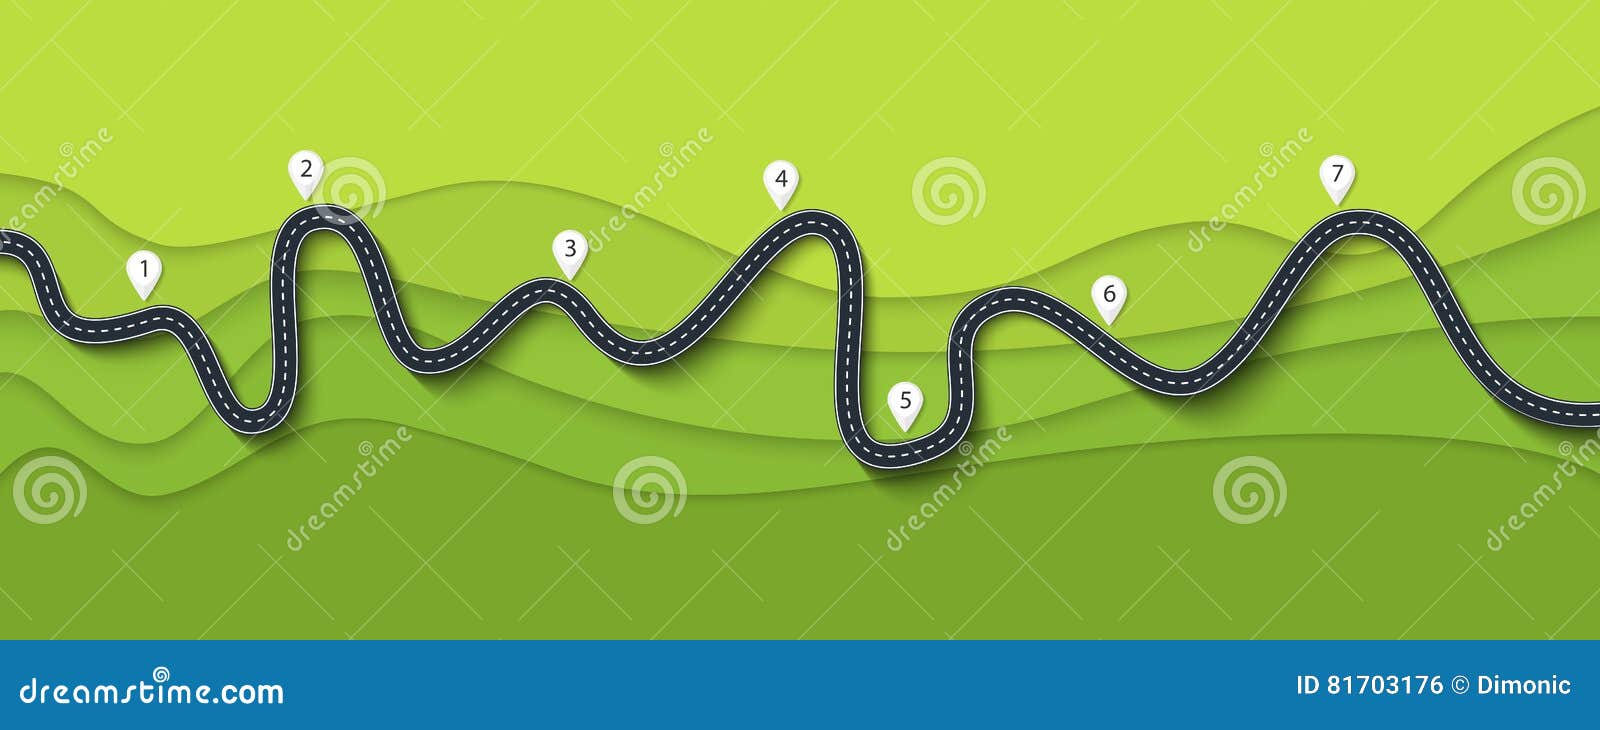 road trip and journey route. winding road on a colorful background with pin pointer